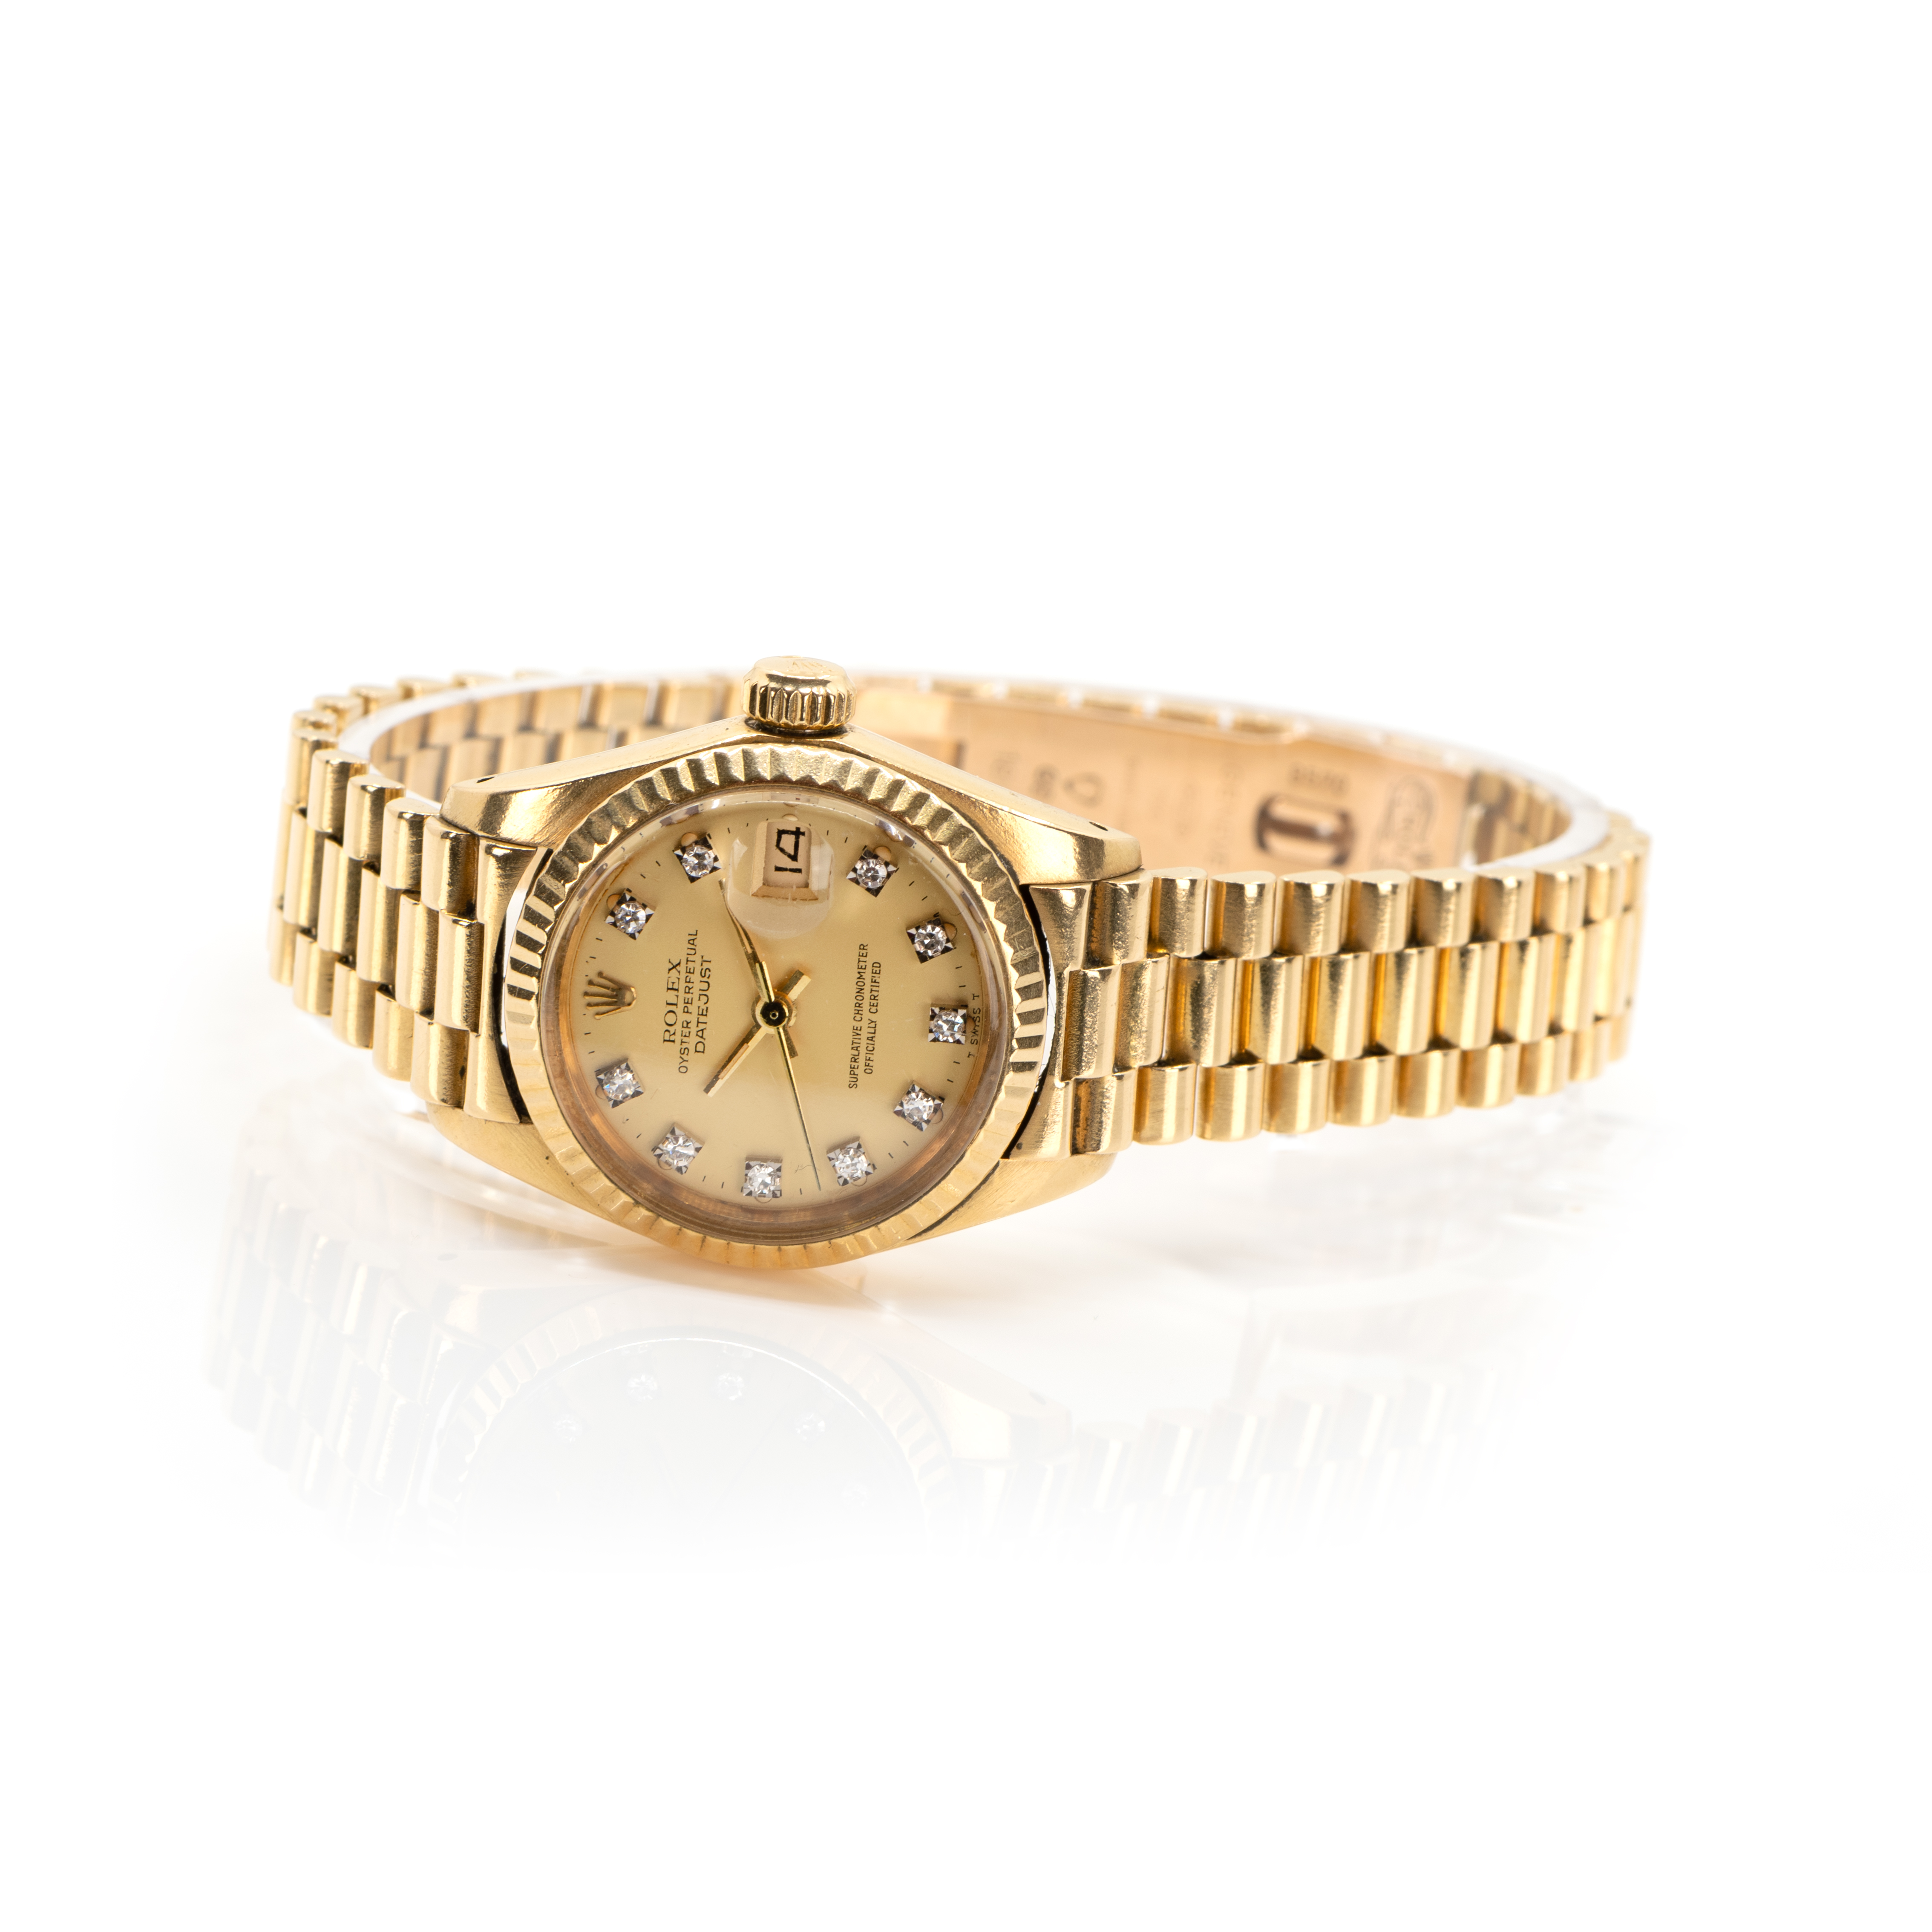 Rolex Lady-Datejust - Image 2 of 6